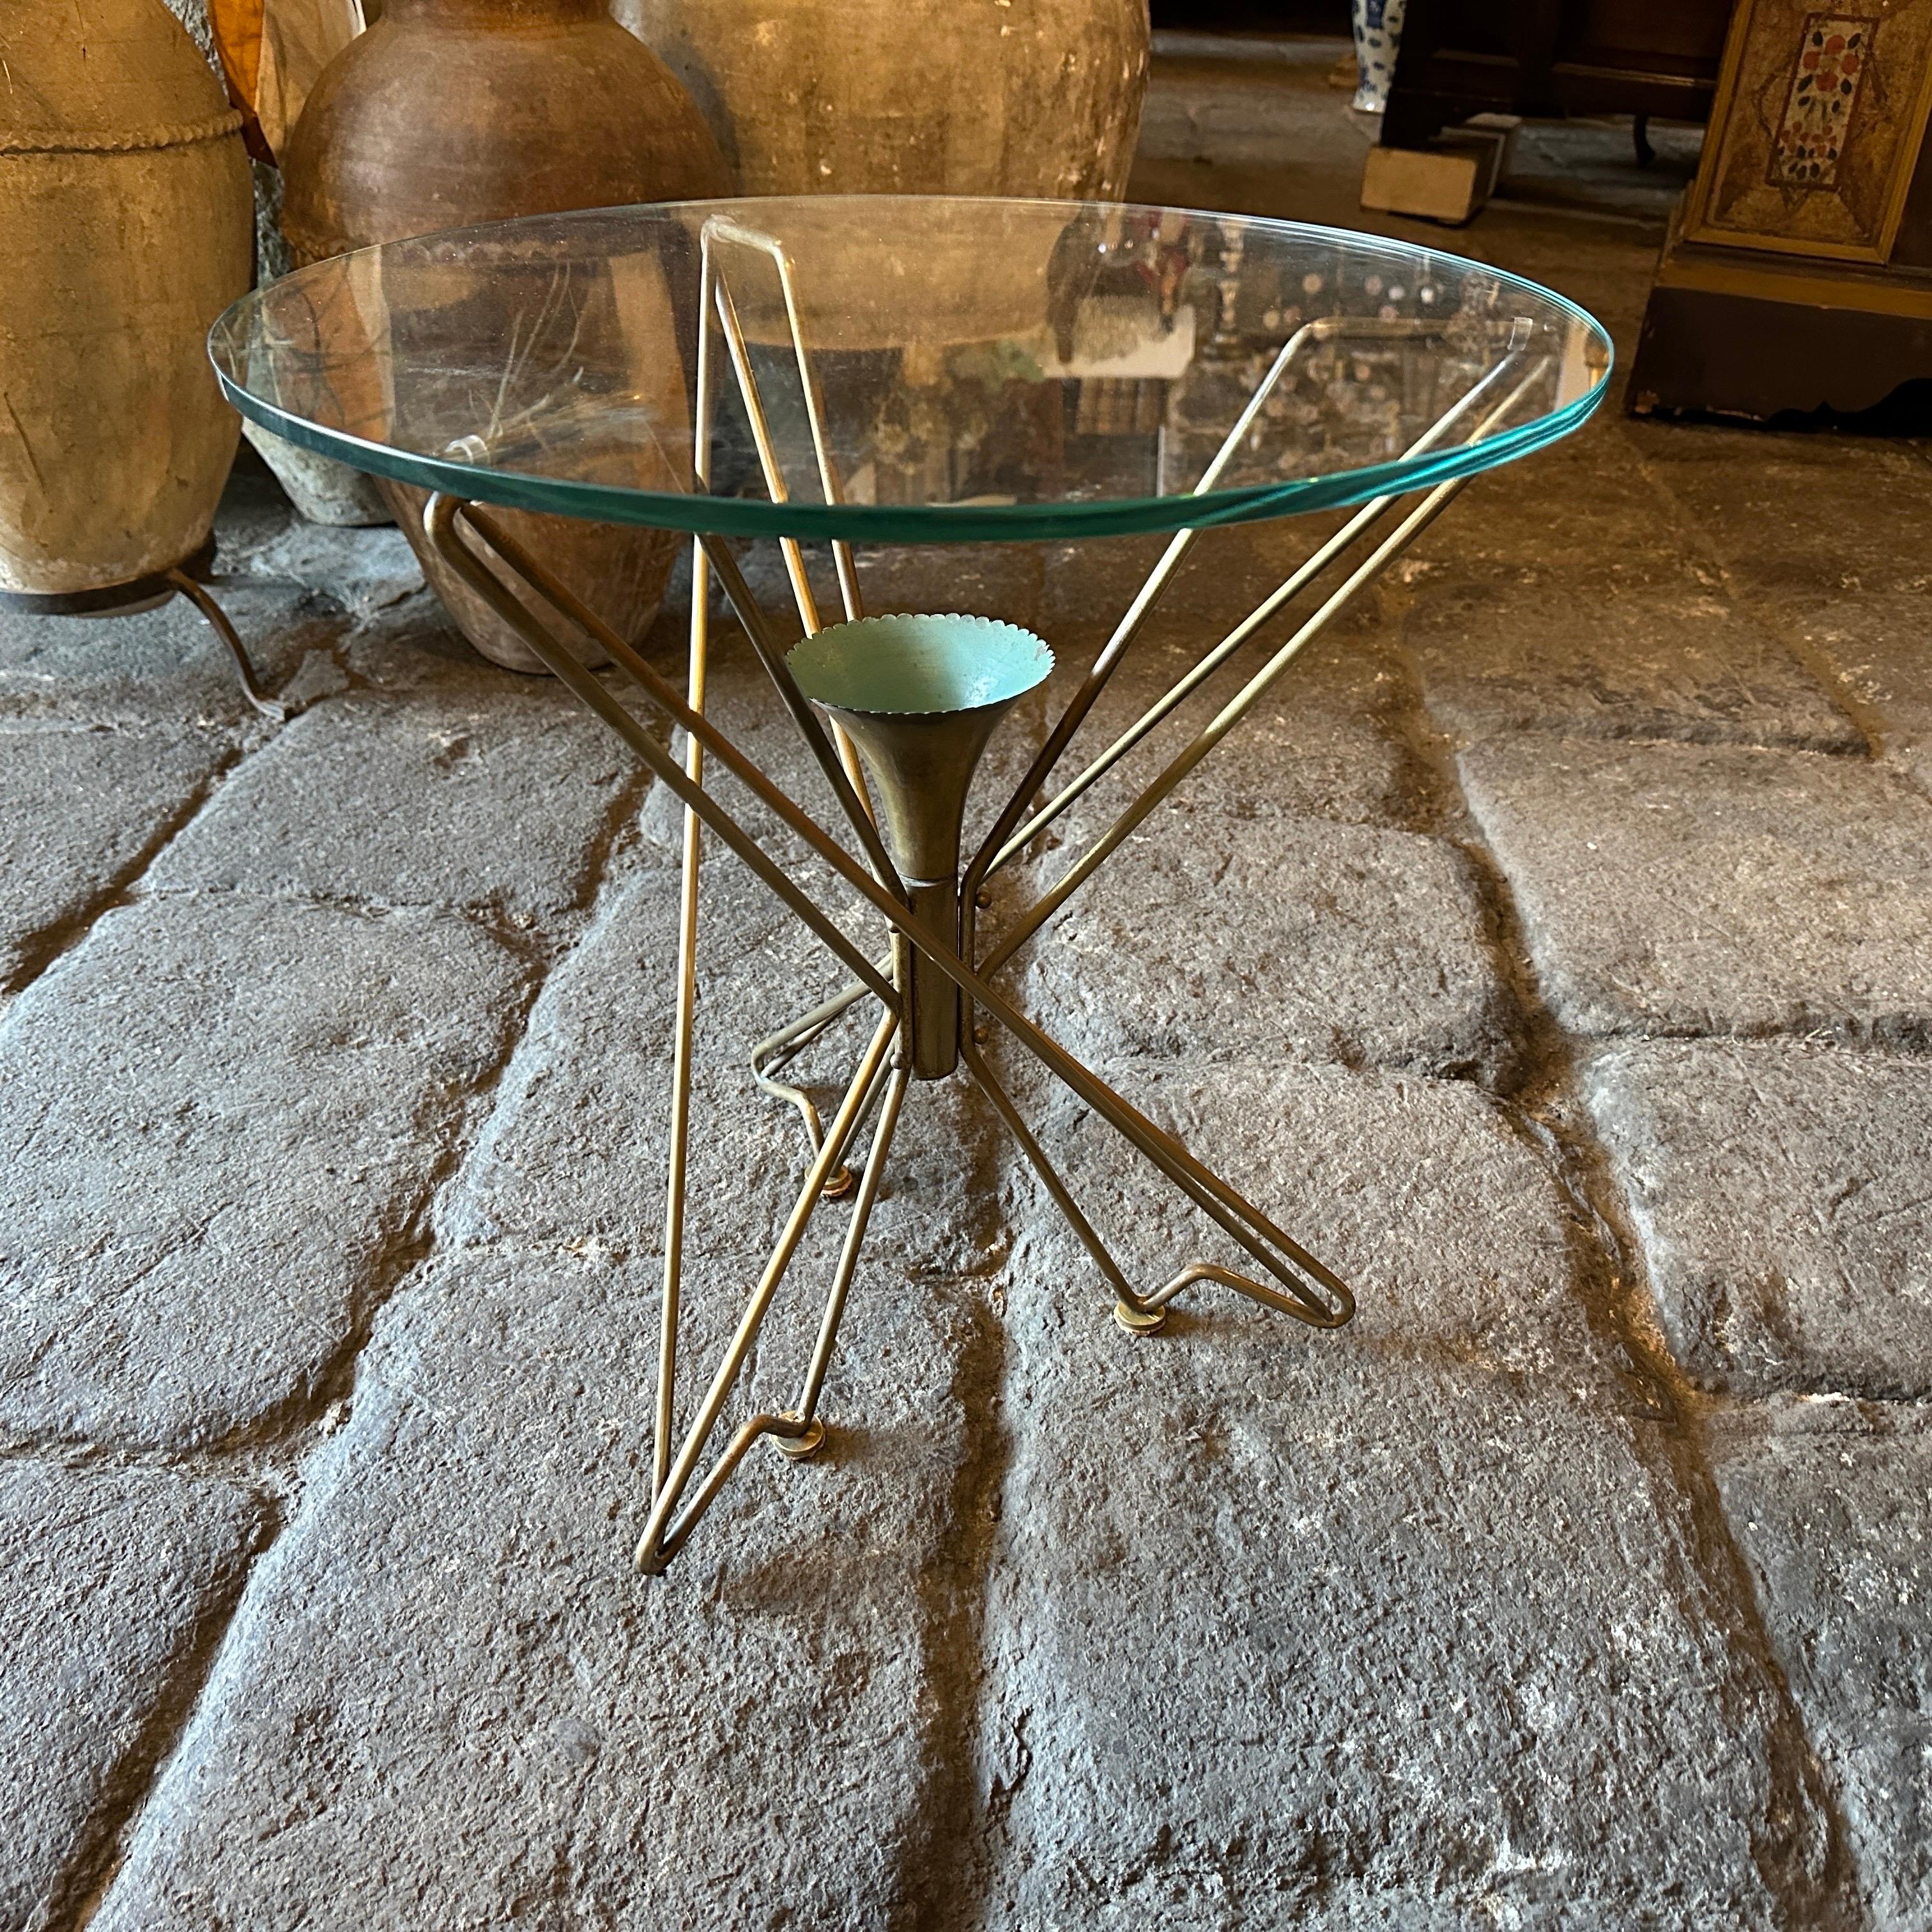 1950s Gio Ponti Style Mid-Century Modern Solid Brass Round Italian Coffee Table For Sale 1